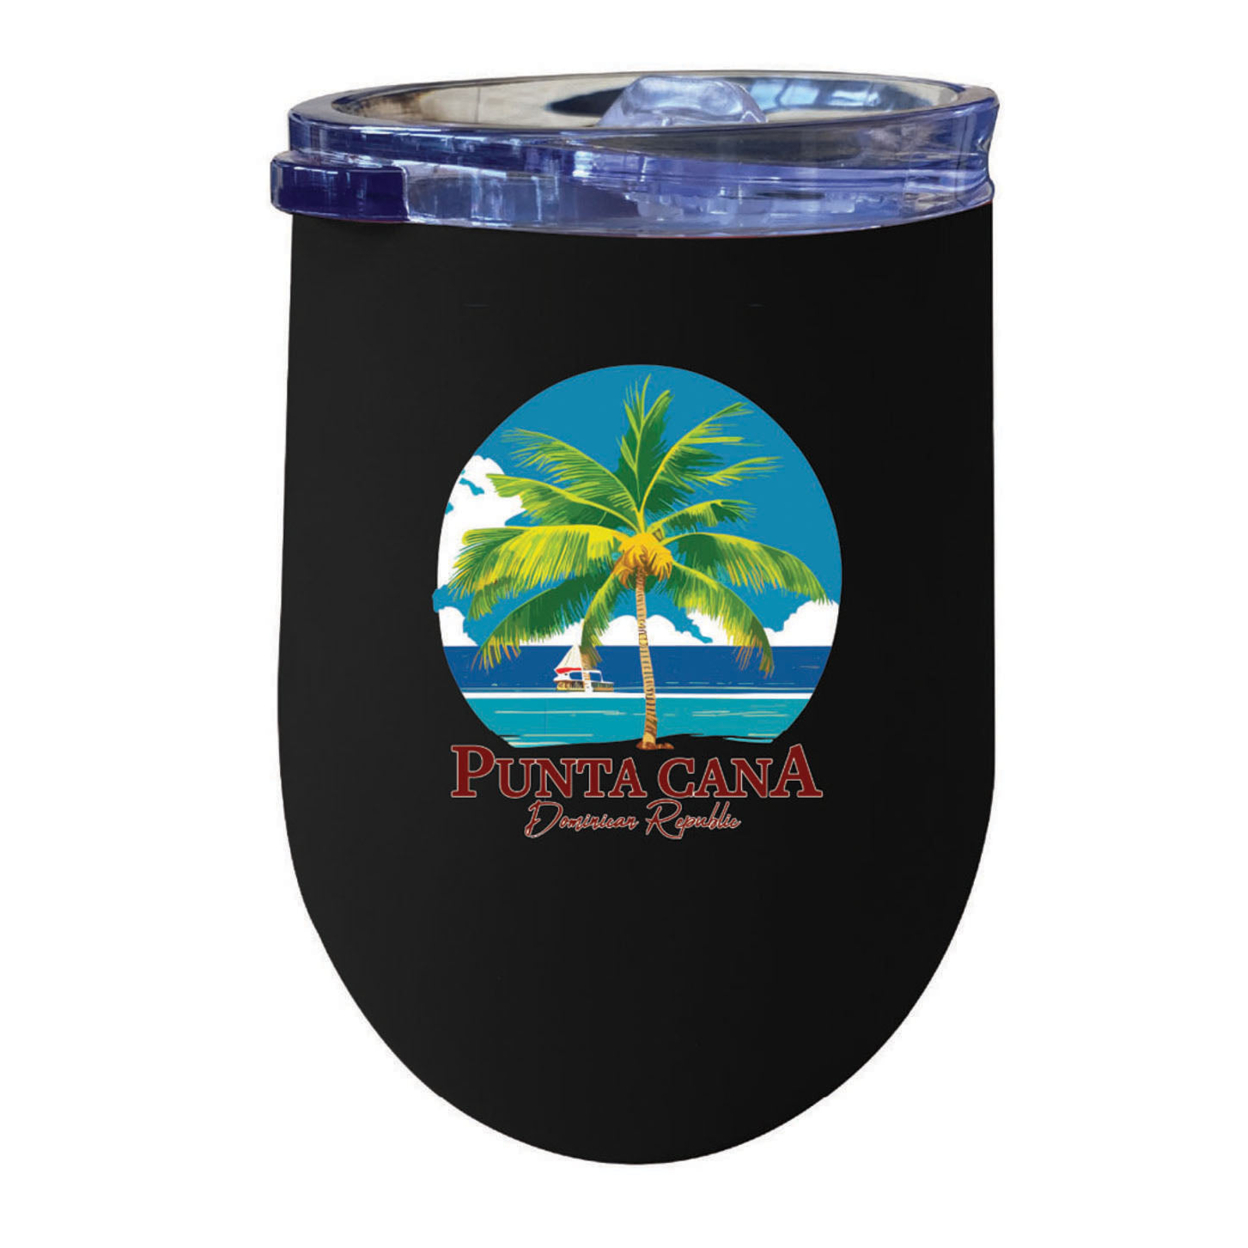 Punta Cana Dominican Republic Souvenir 12 Oz Insulated Wine Stainless Steel Tumbler - Purple, PALM